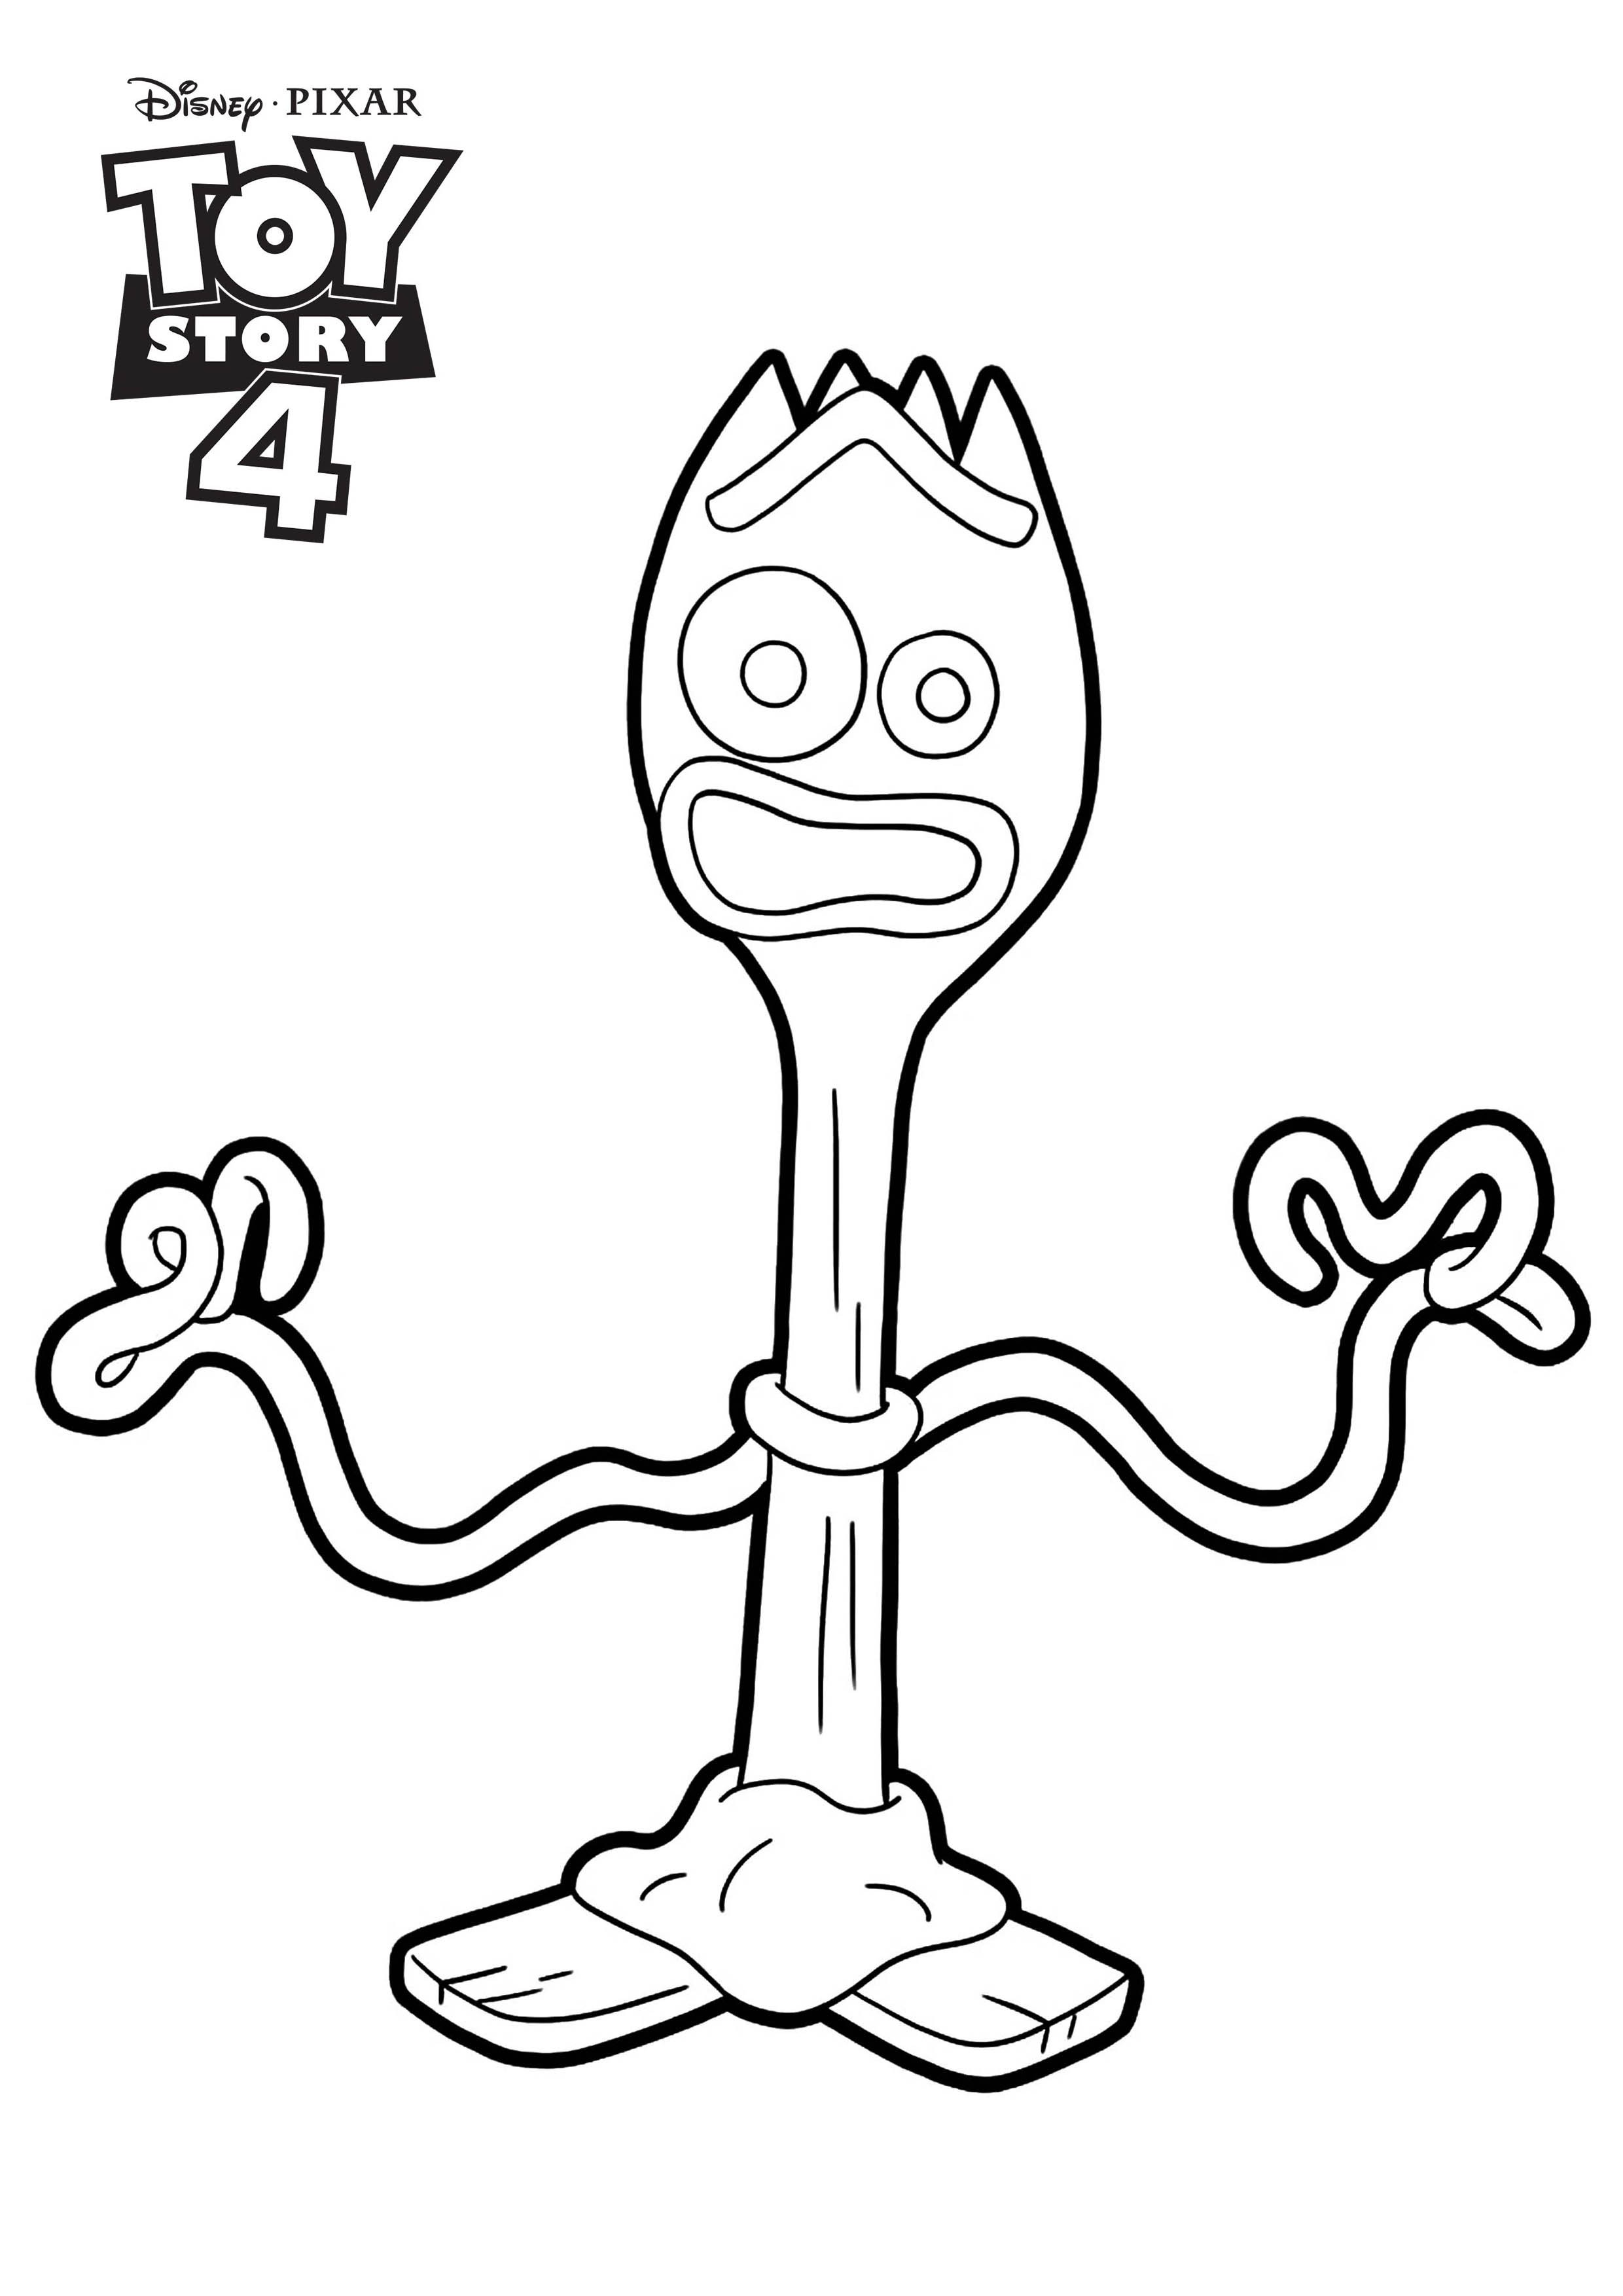 Forky : Toy Story 4 coloring page Disney / Pixar - Toy Story 4 ... - SheetalColor.com